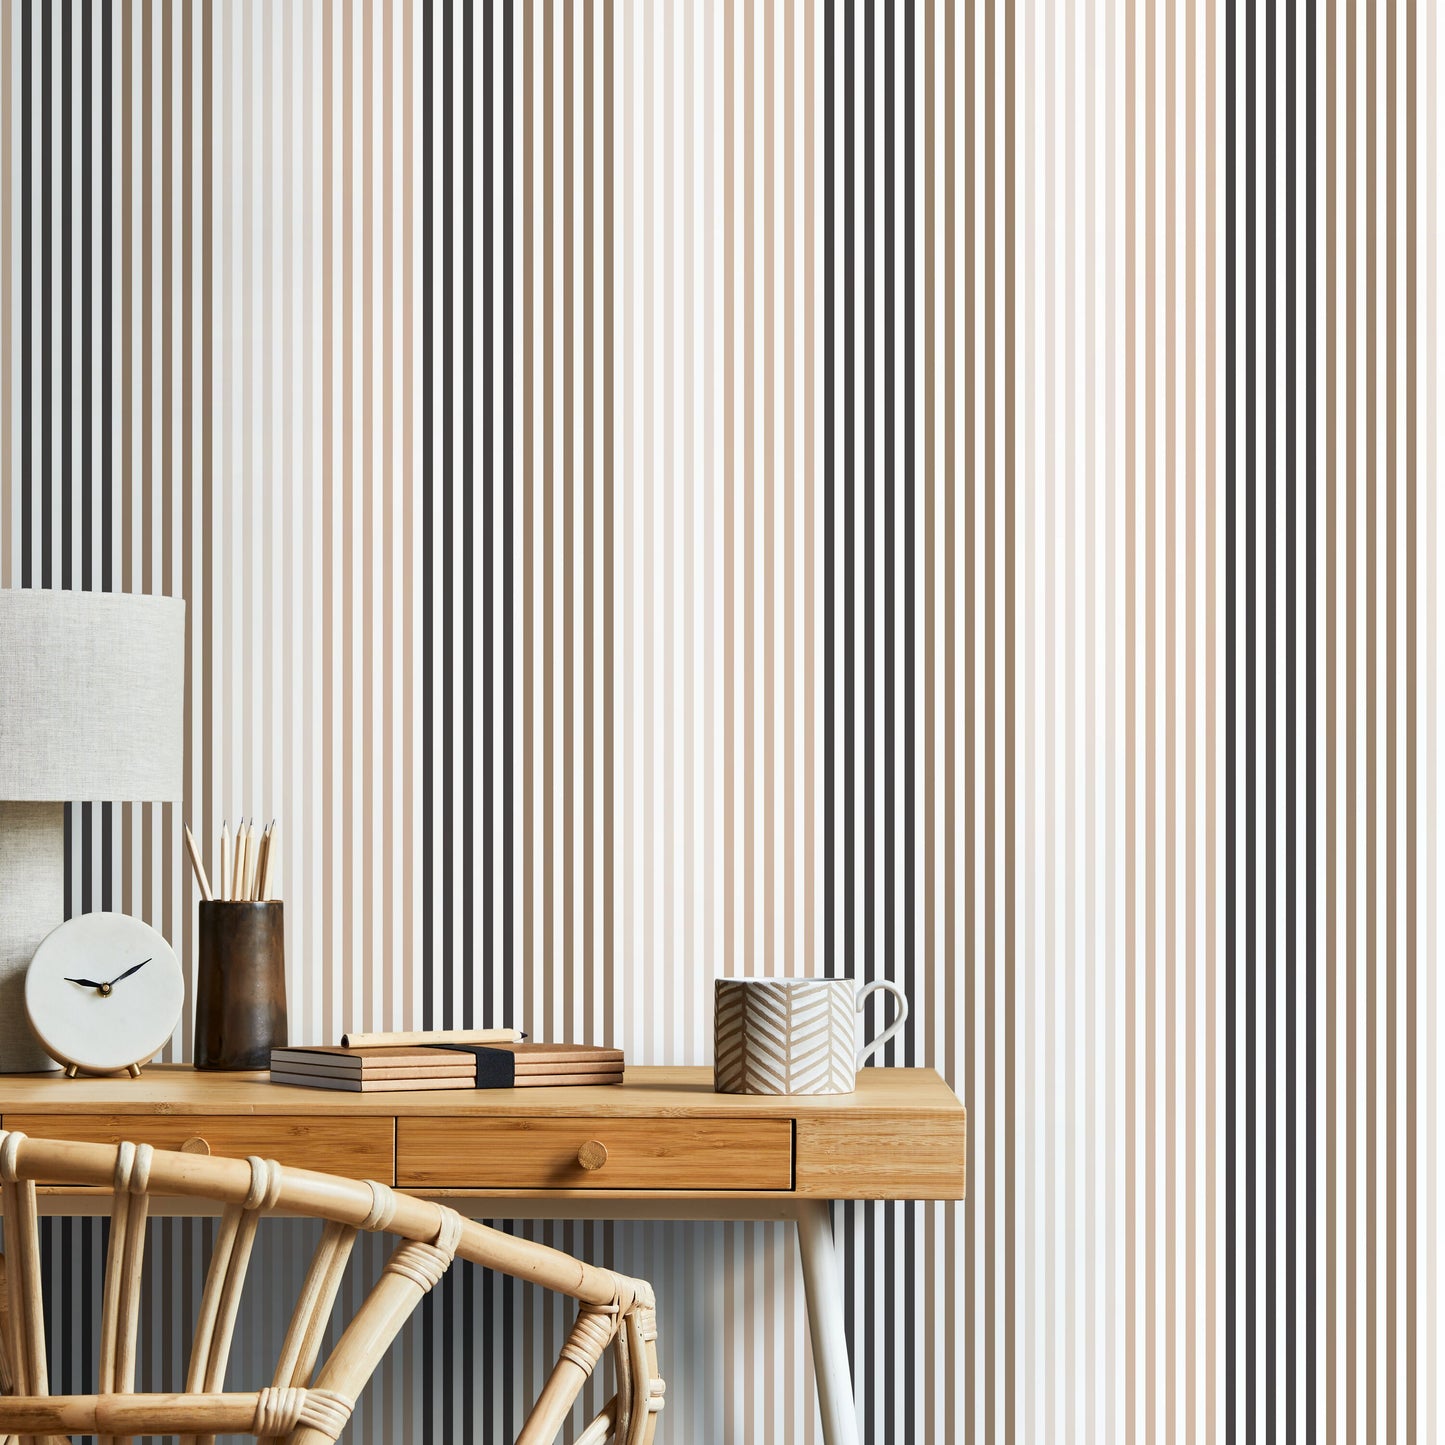 Beige Modern Striped Wallpaper Geometric Wallpaper Peel and Stick and Traditional Wallpaper - D755